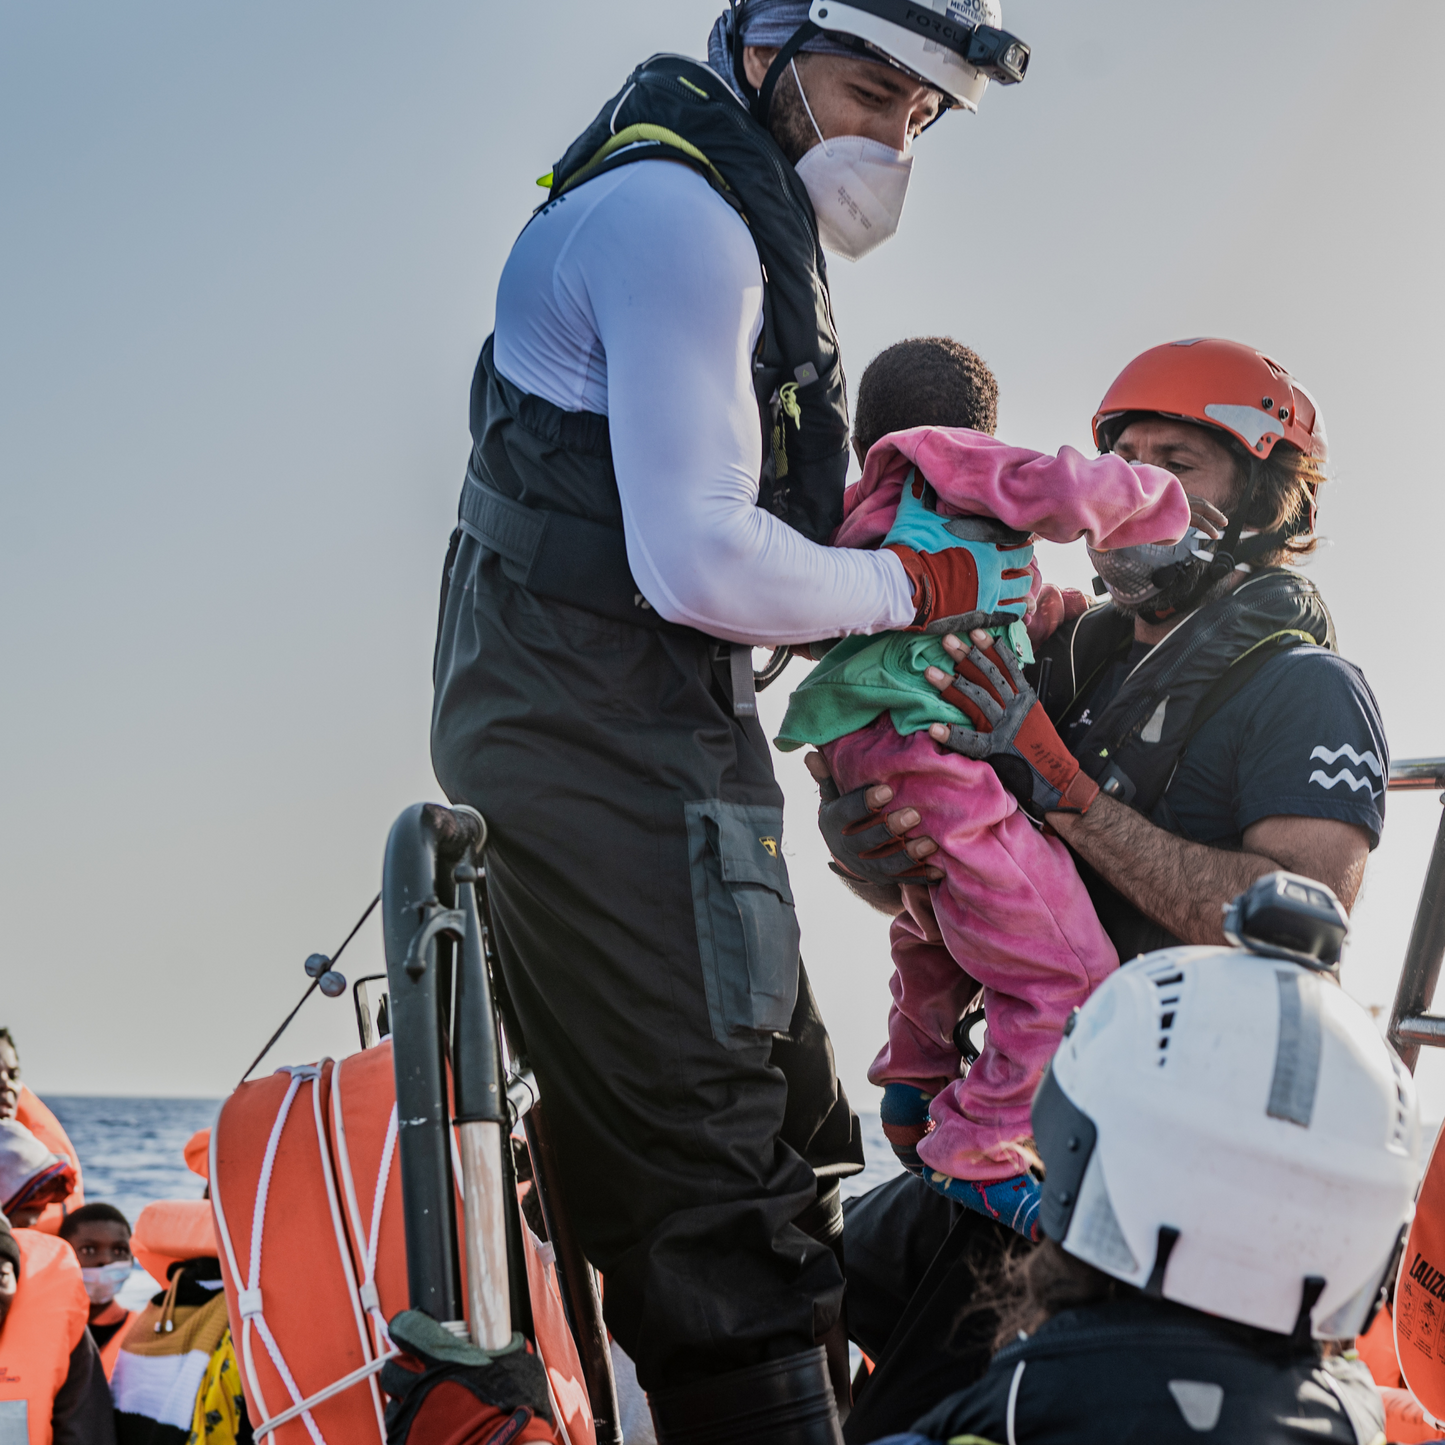 Refugee toddler beign saved from the sea. Other refugees can be seen in the background on boats.